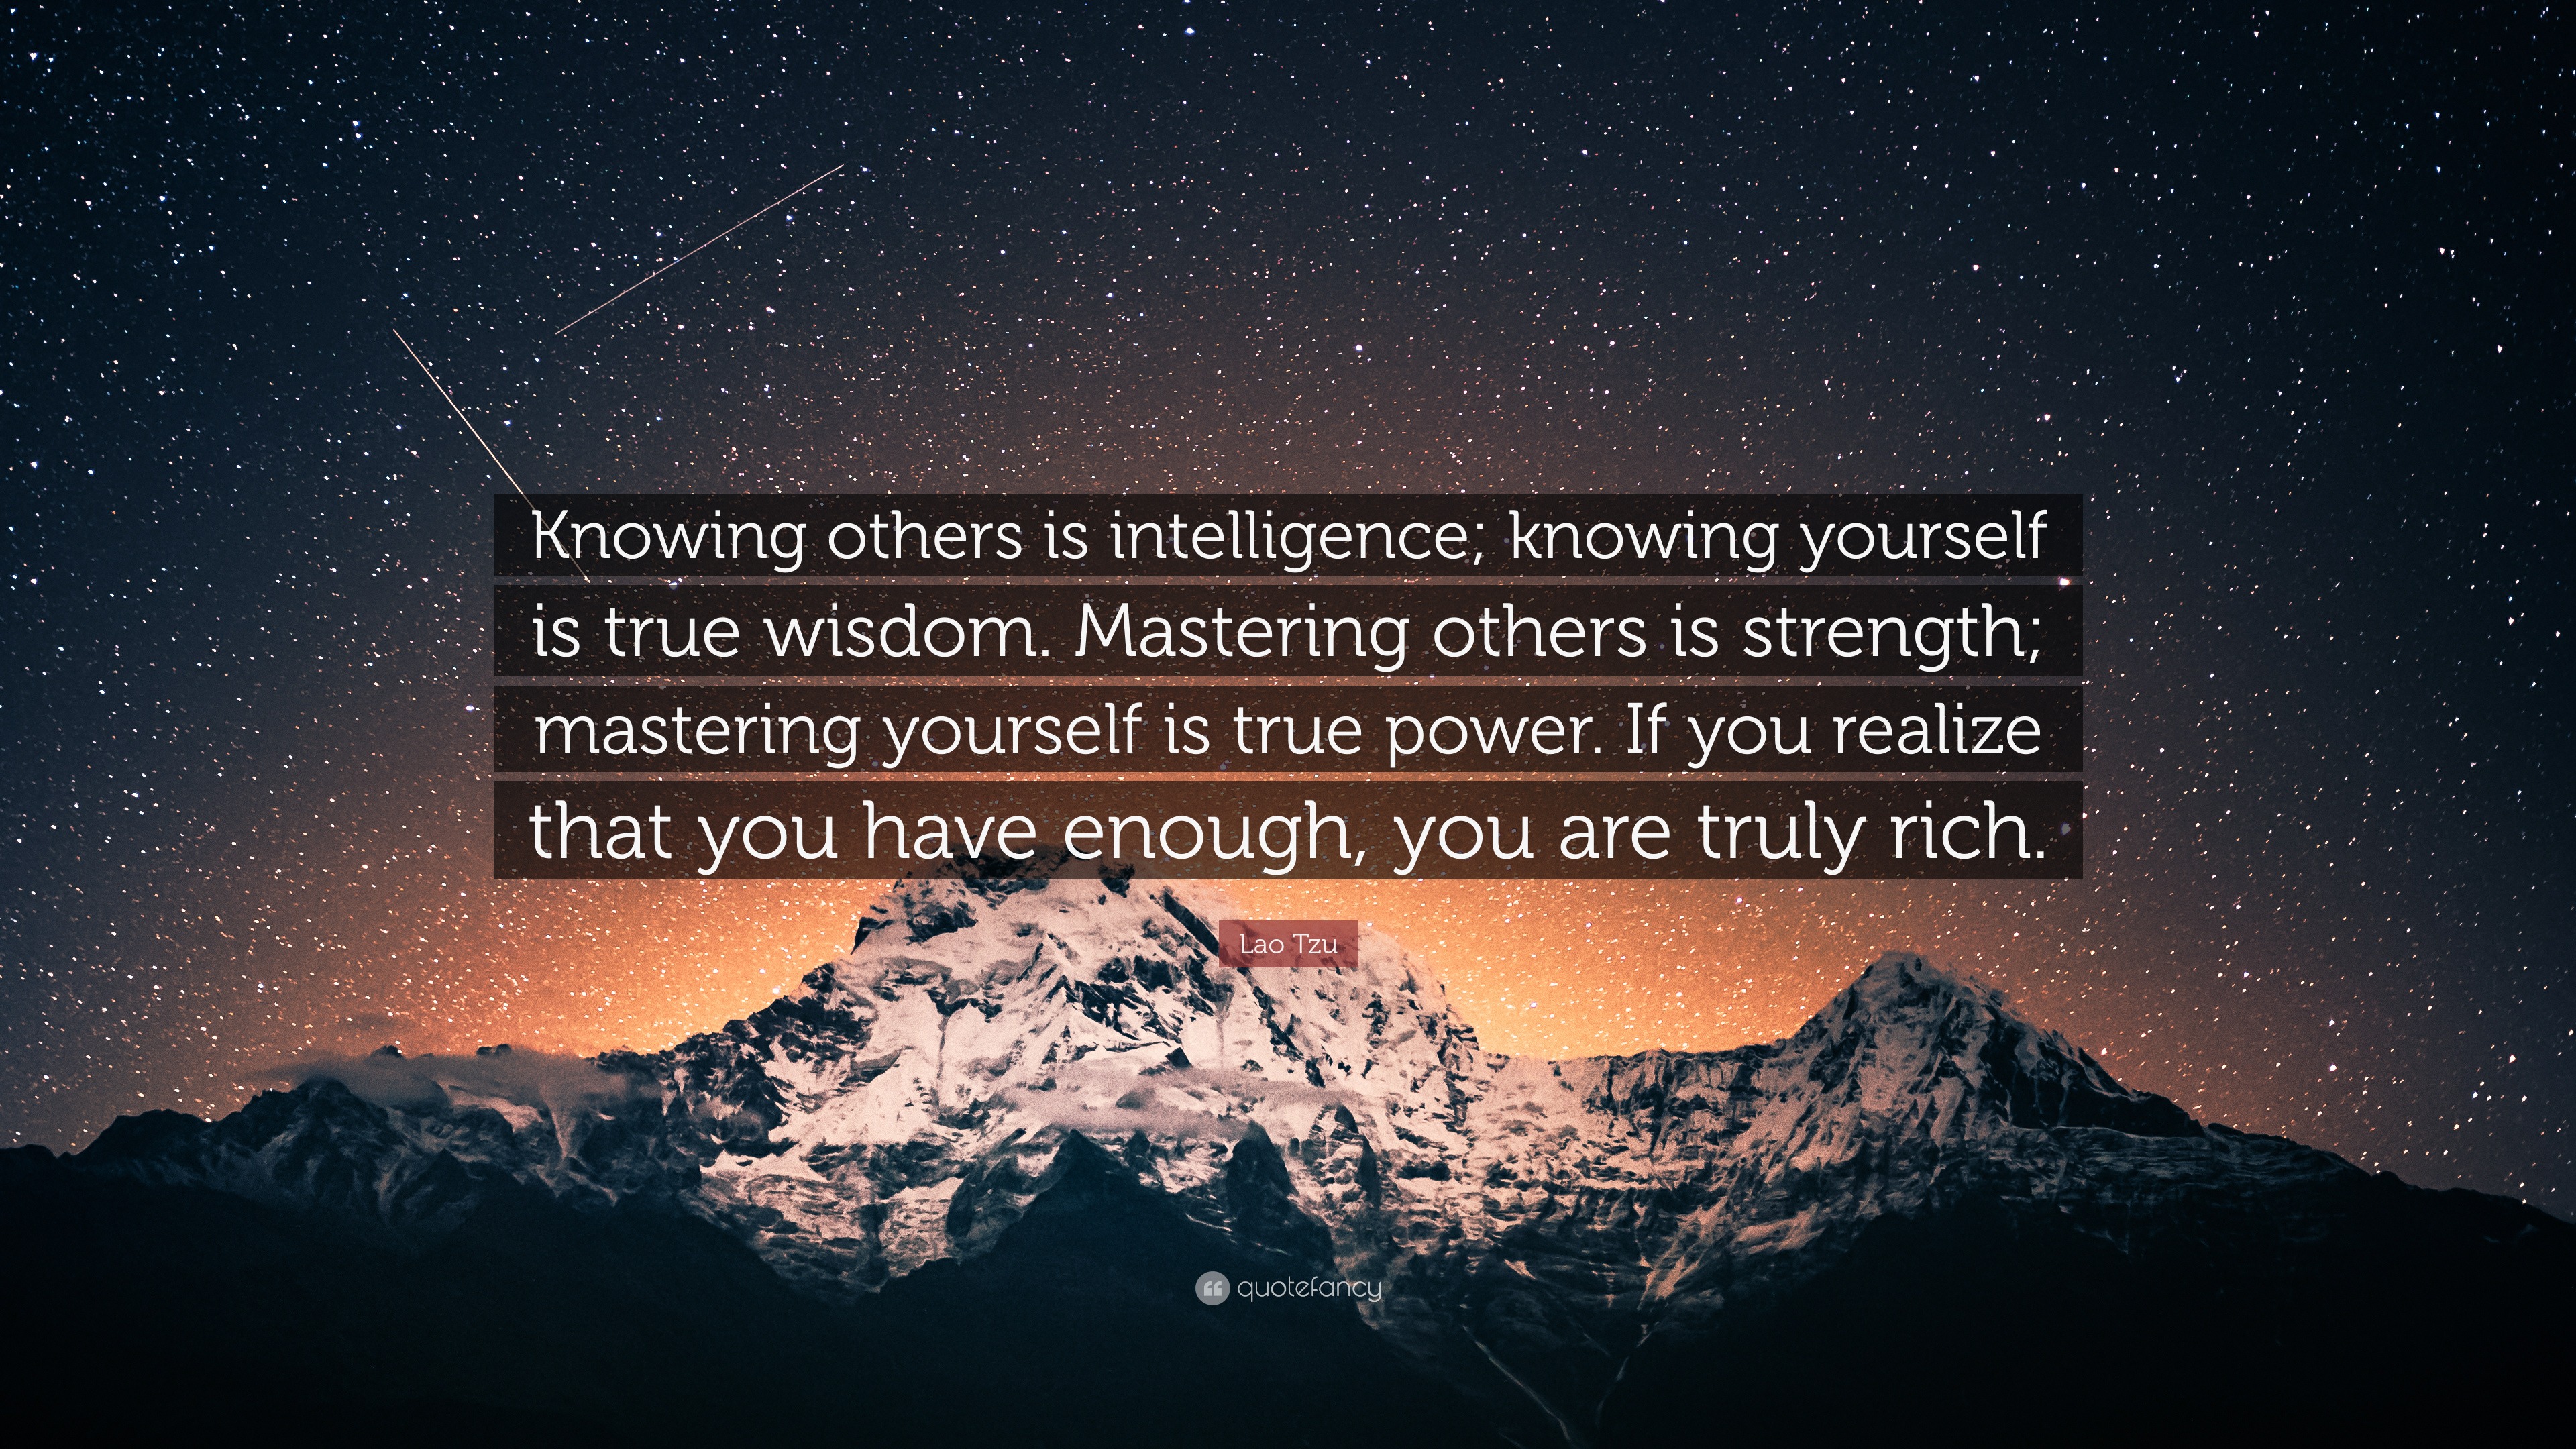 Lao Tzu Quote: “Knowing others is intelligence; knowing yourself is